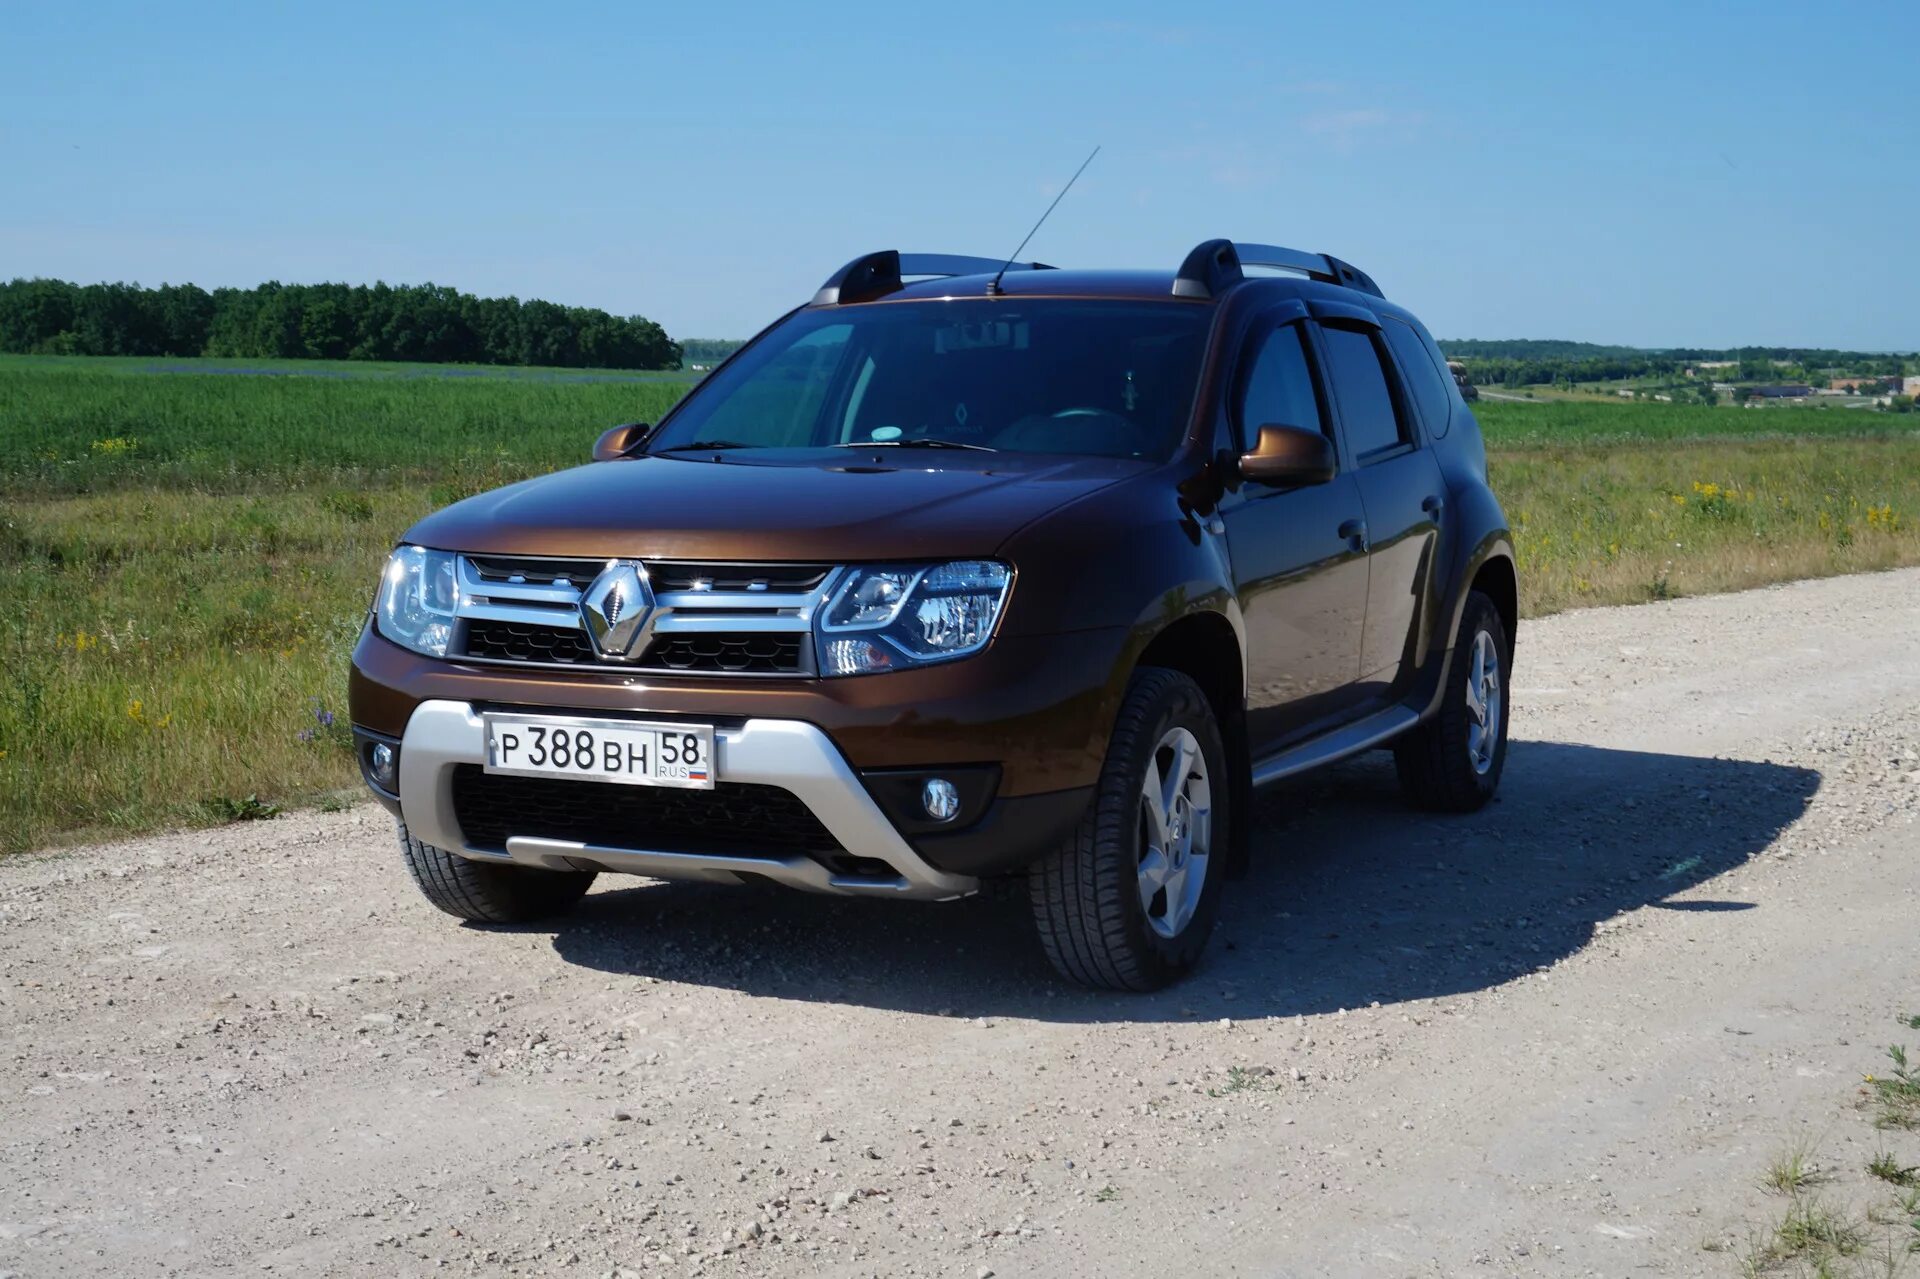 RENAULT%20DUSTER. Дастер 20. Рено Дастер 1 кузов. Дастер 12. Рено дастер 2019 2.0